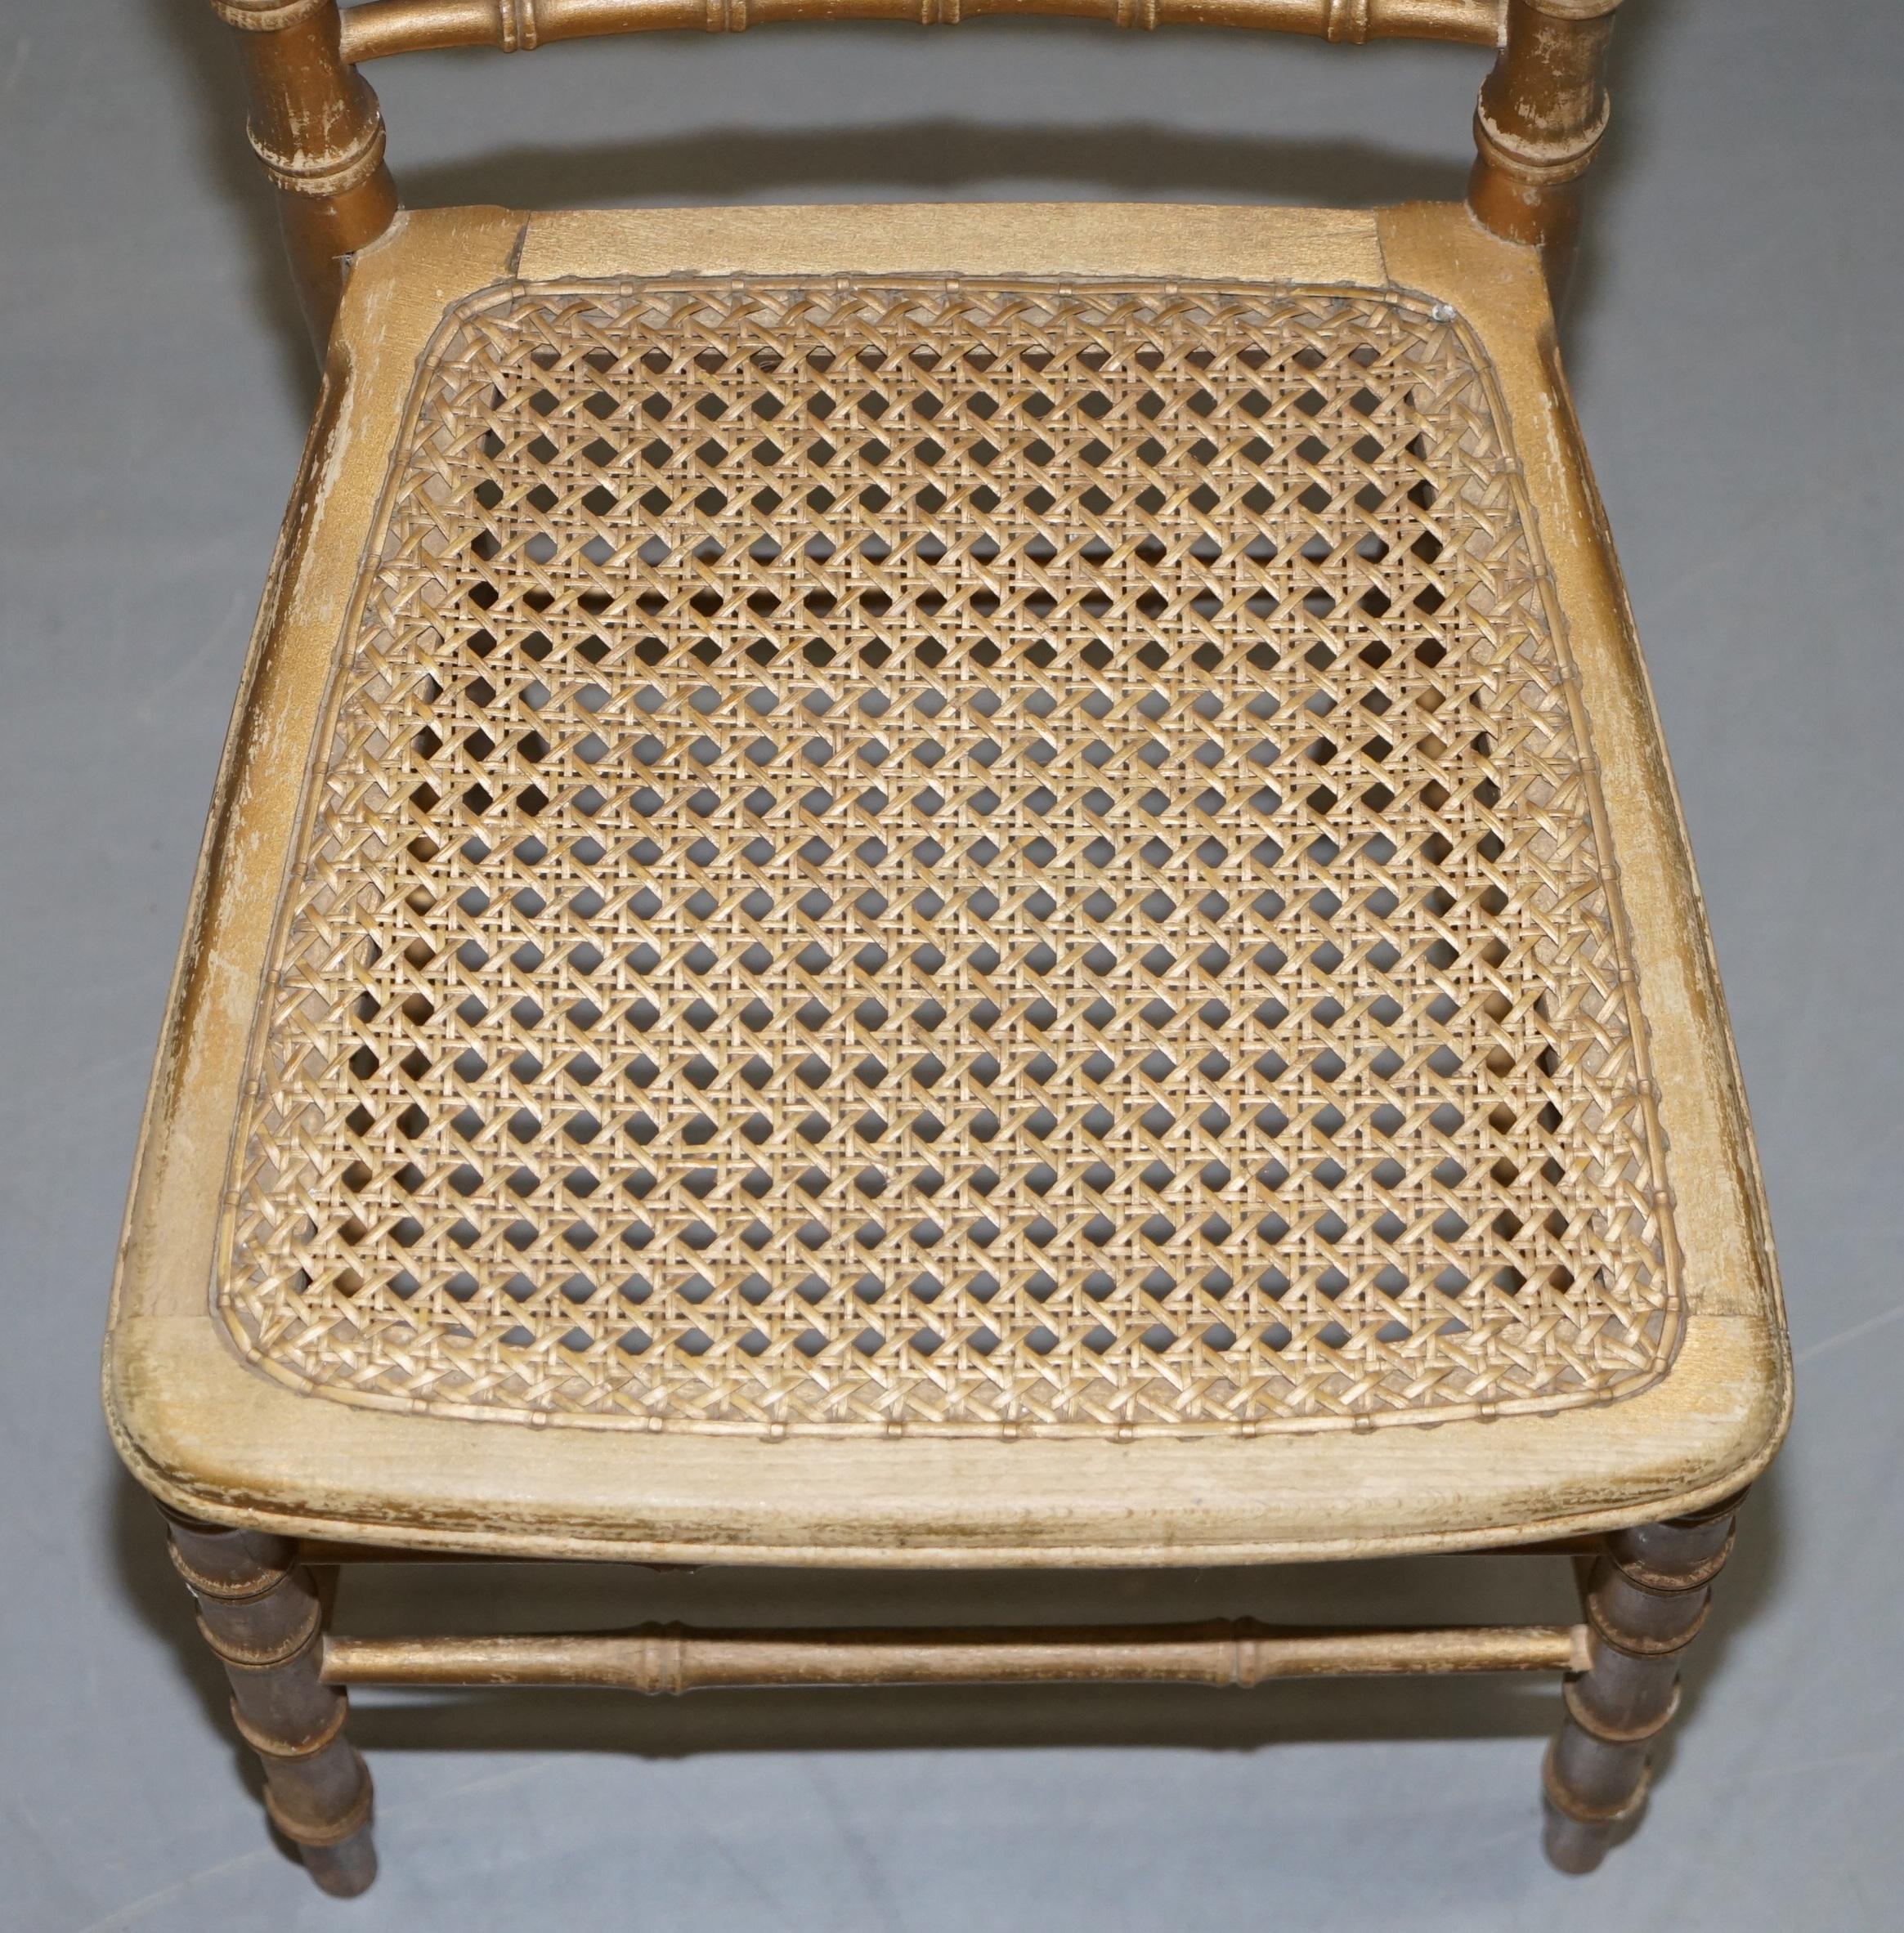 Edwardian Giltwood Famboo Regency Style Berger Chair with Newly Gold Giilt Frame For Sale 10